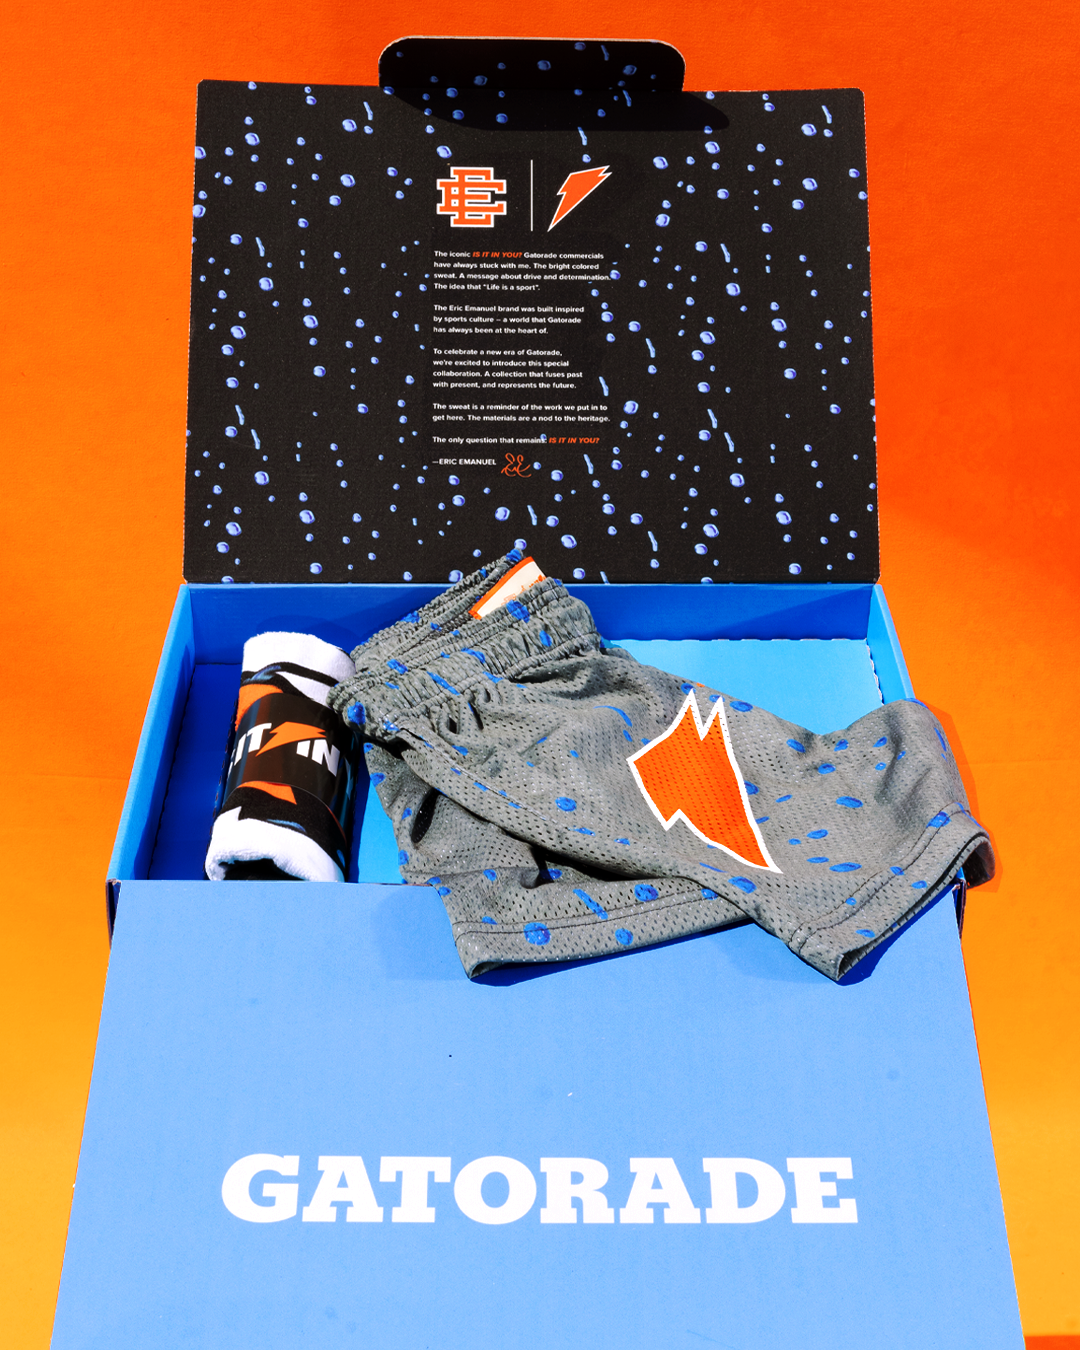 Gatorade gift box with branded shorts, headband, and towel. The lid features a message and two logos: one of Gatorade and one with the initials &quot;EE&quot;